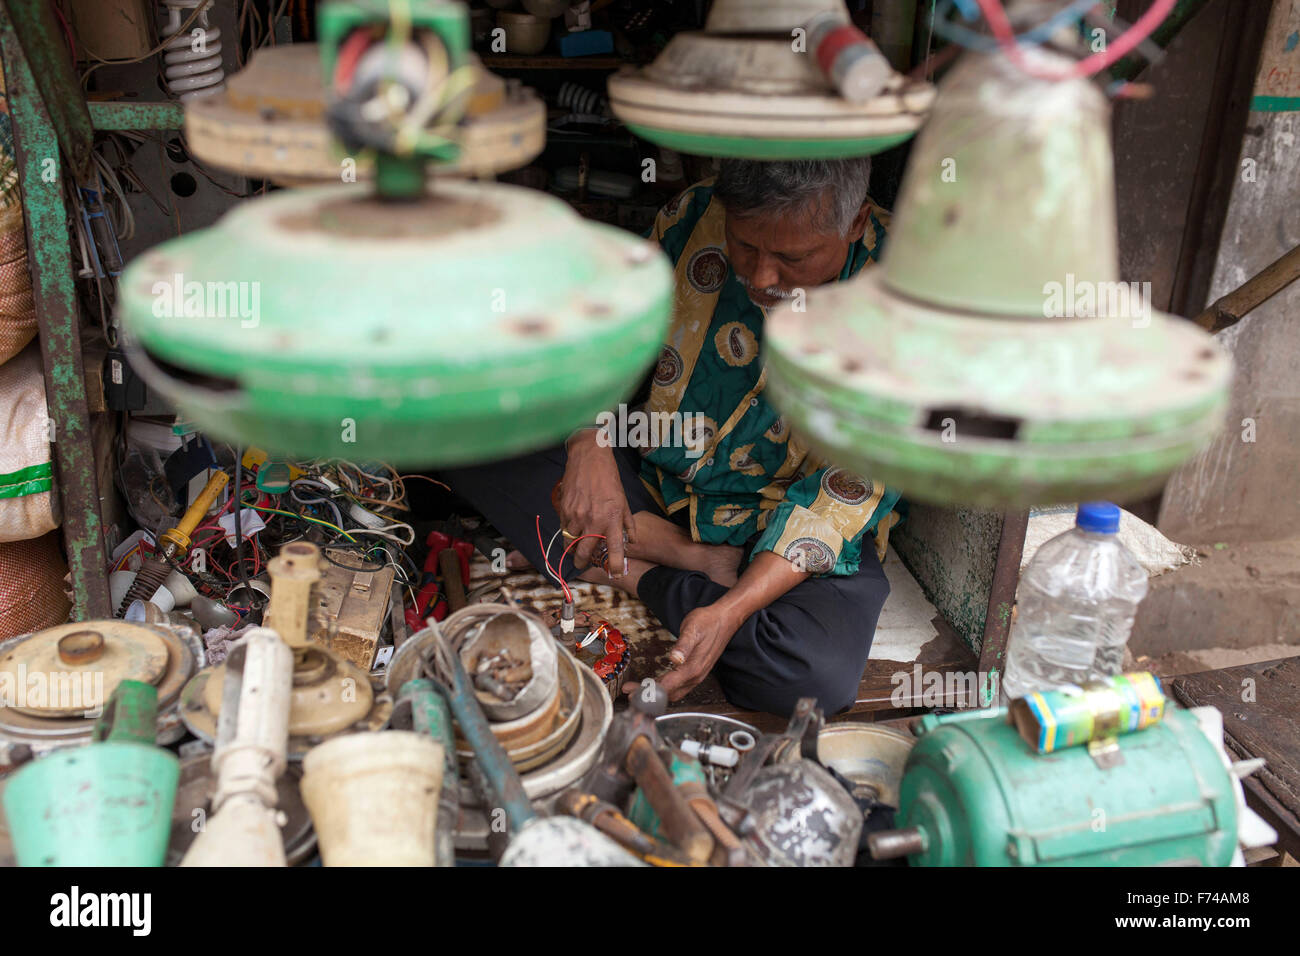 DHAKA, BANGLADESH 17th November: A repair man repairing electrical machinery in his shop in Old Dhaka on November 17, 2015. Old Dhaka is a term used to refer to the historic old city of Dhaka, the capital of modern Bangladesh. It was founded in 1608 as Jahangir Nagar, the capital of Mughal Bengal. Stock Photo